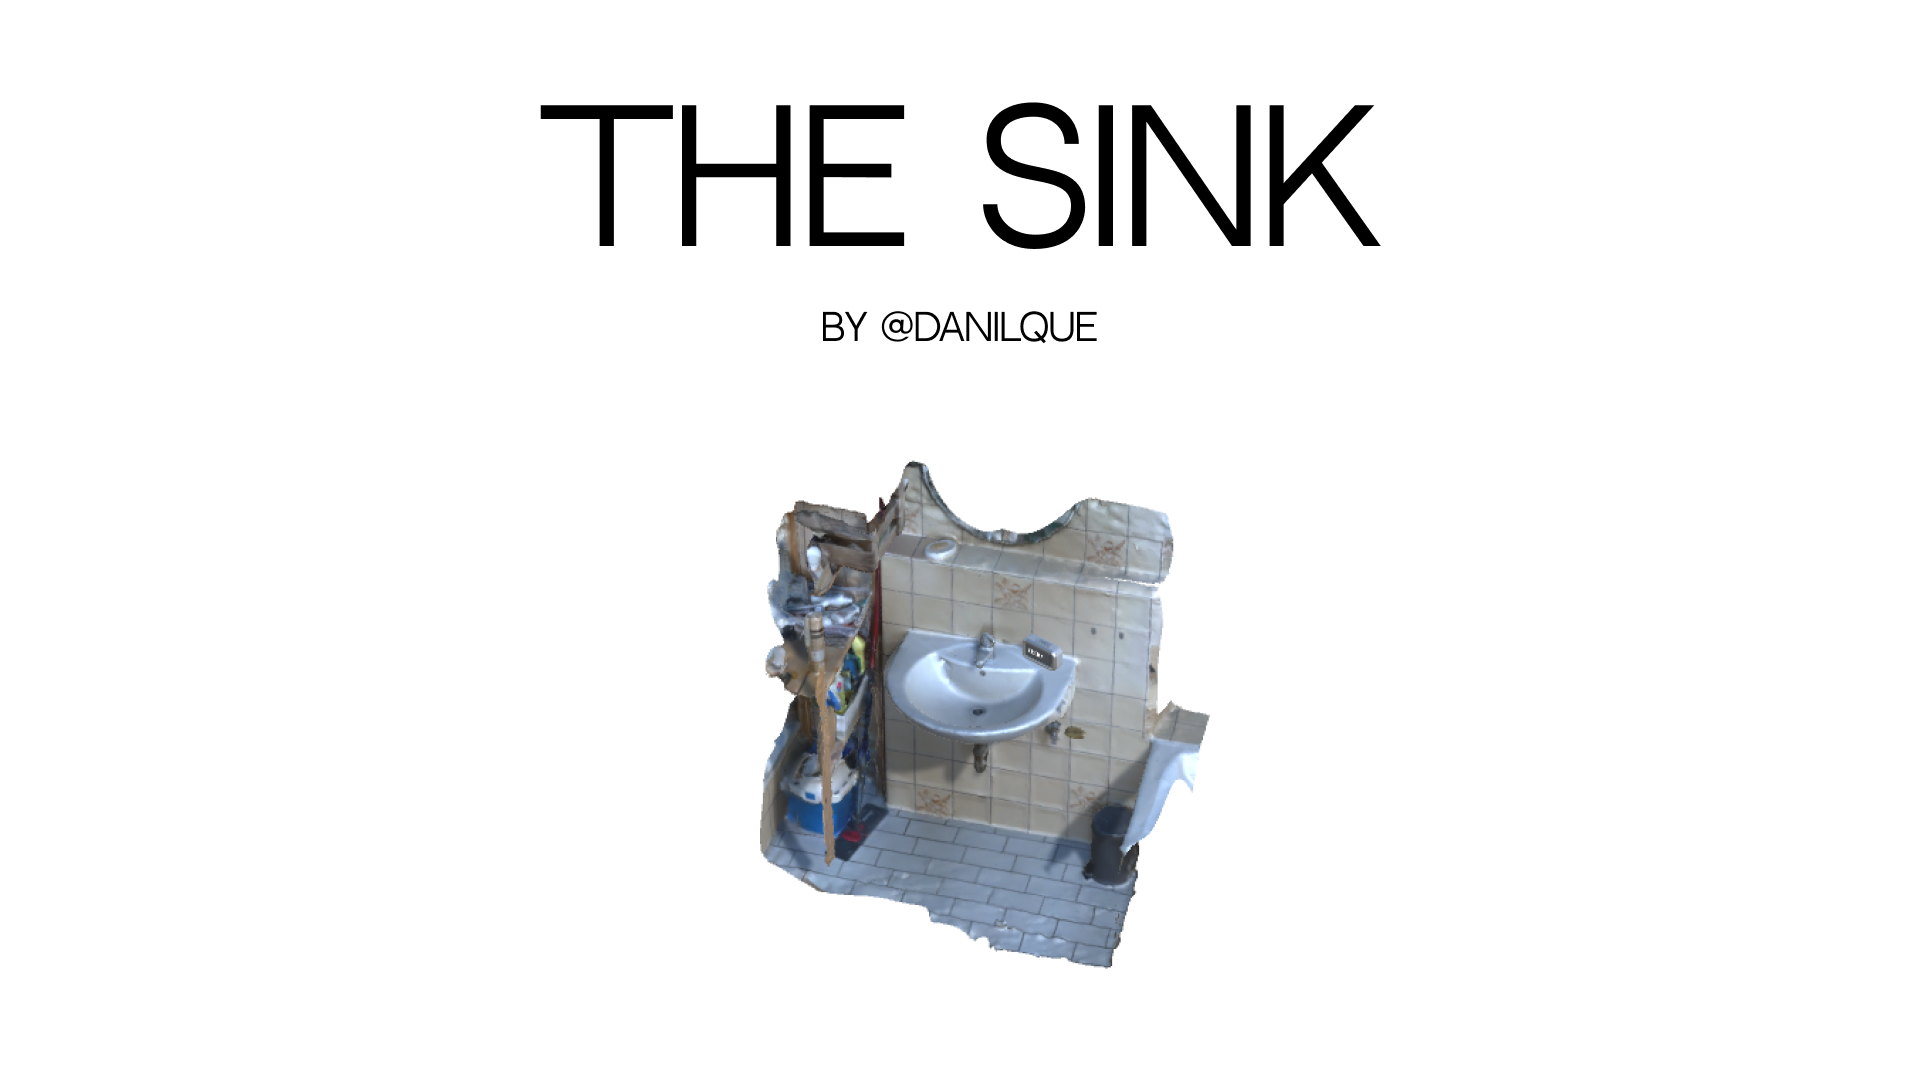 THE SINK